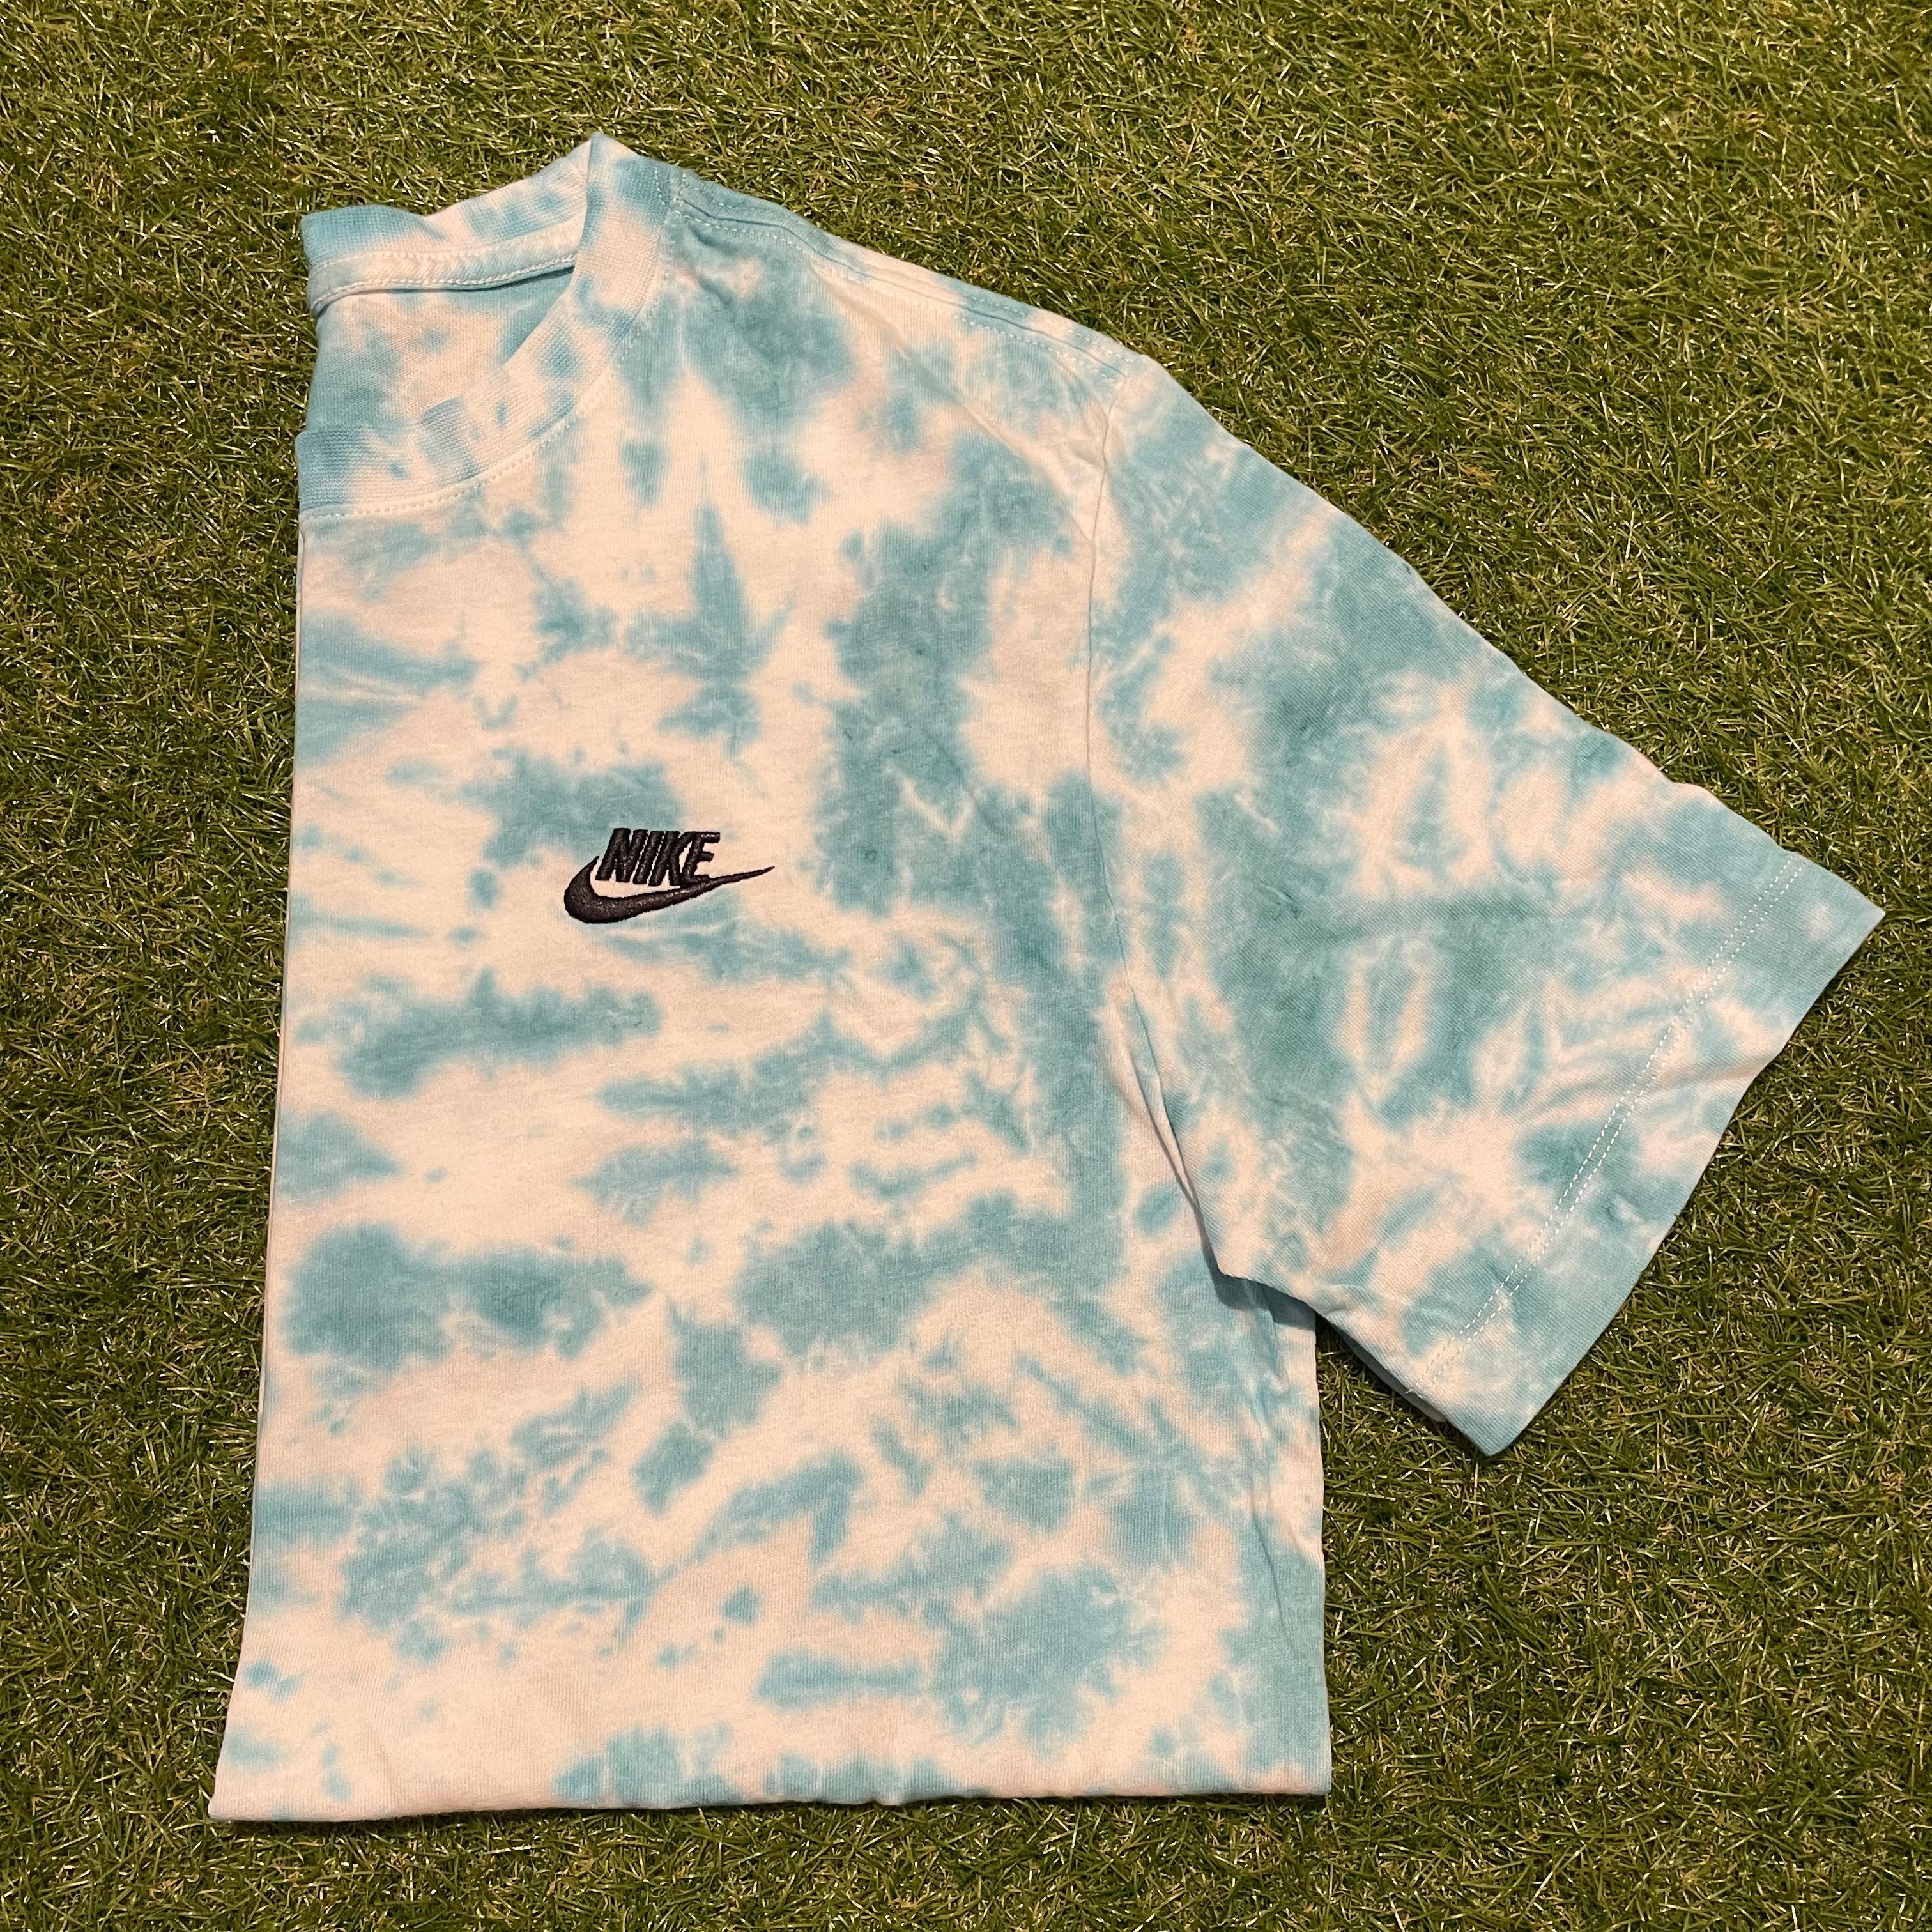 ‘Nike ‘Marbled Teal’ Tie Dyed T-Shirt